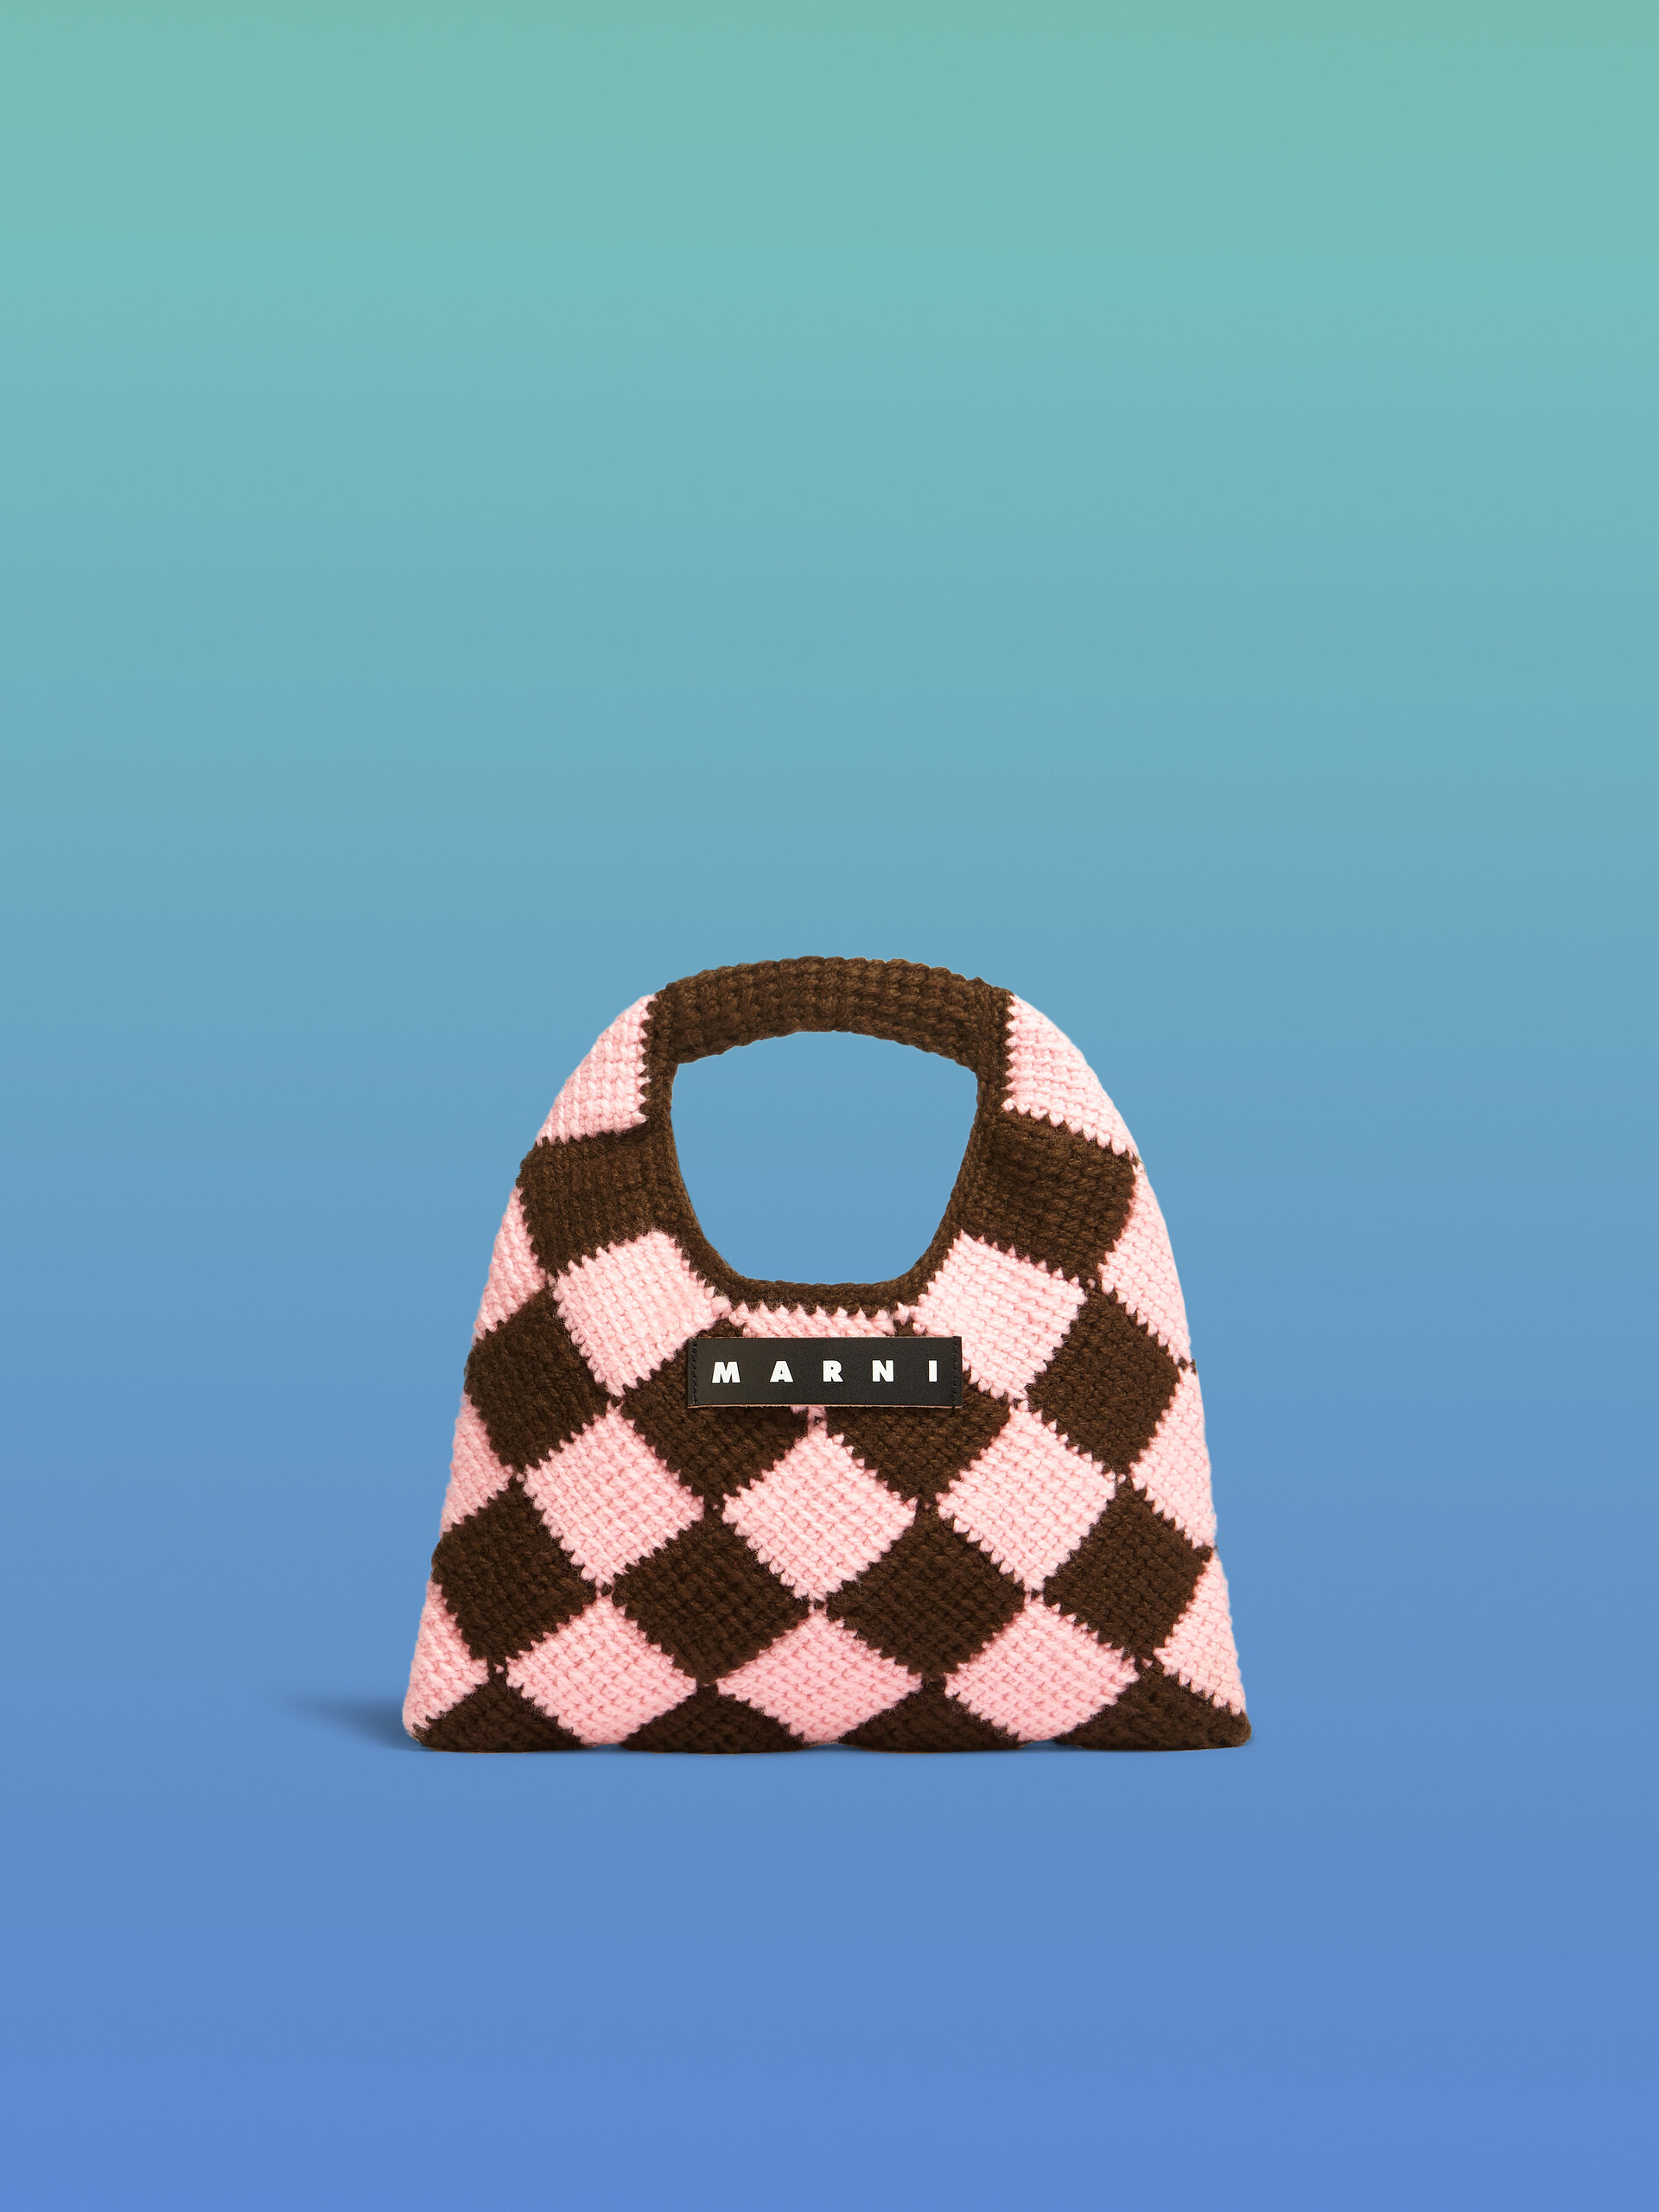 MARNI MARKET DIAMOND small bag in brown and pink tech wool - Bags - Image 1